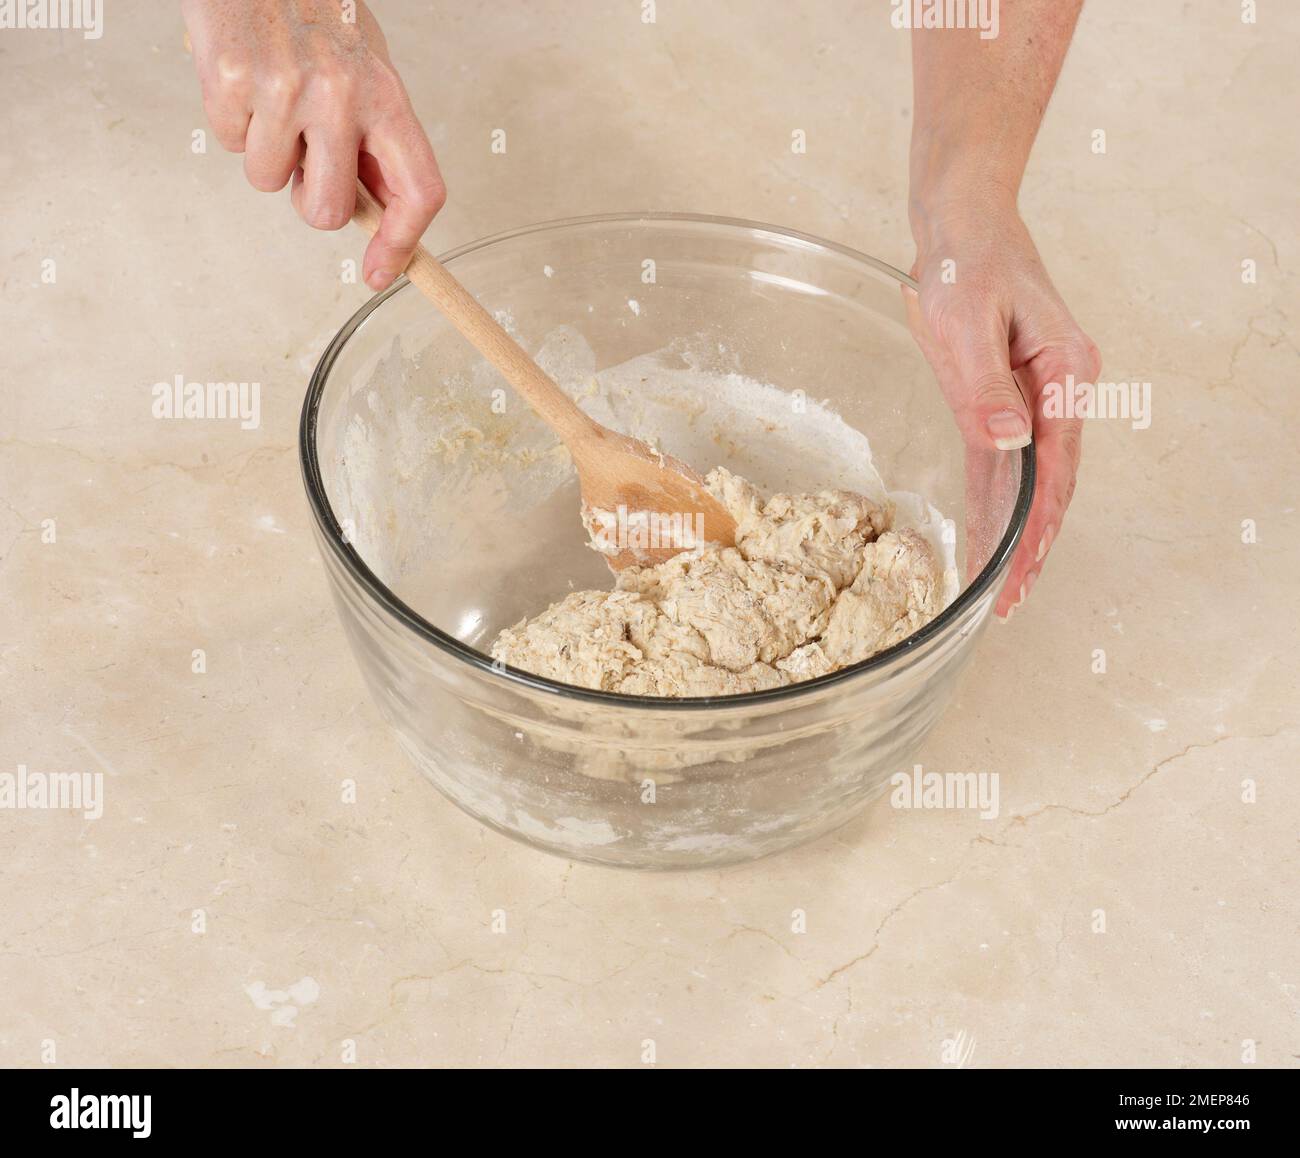 Combining ingredients for pitta bread dough Stock Photo